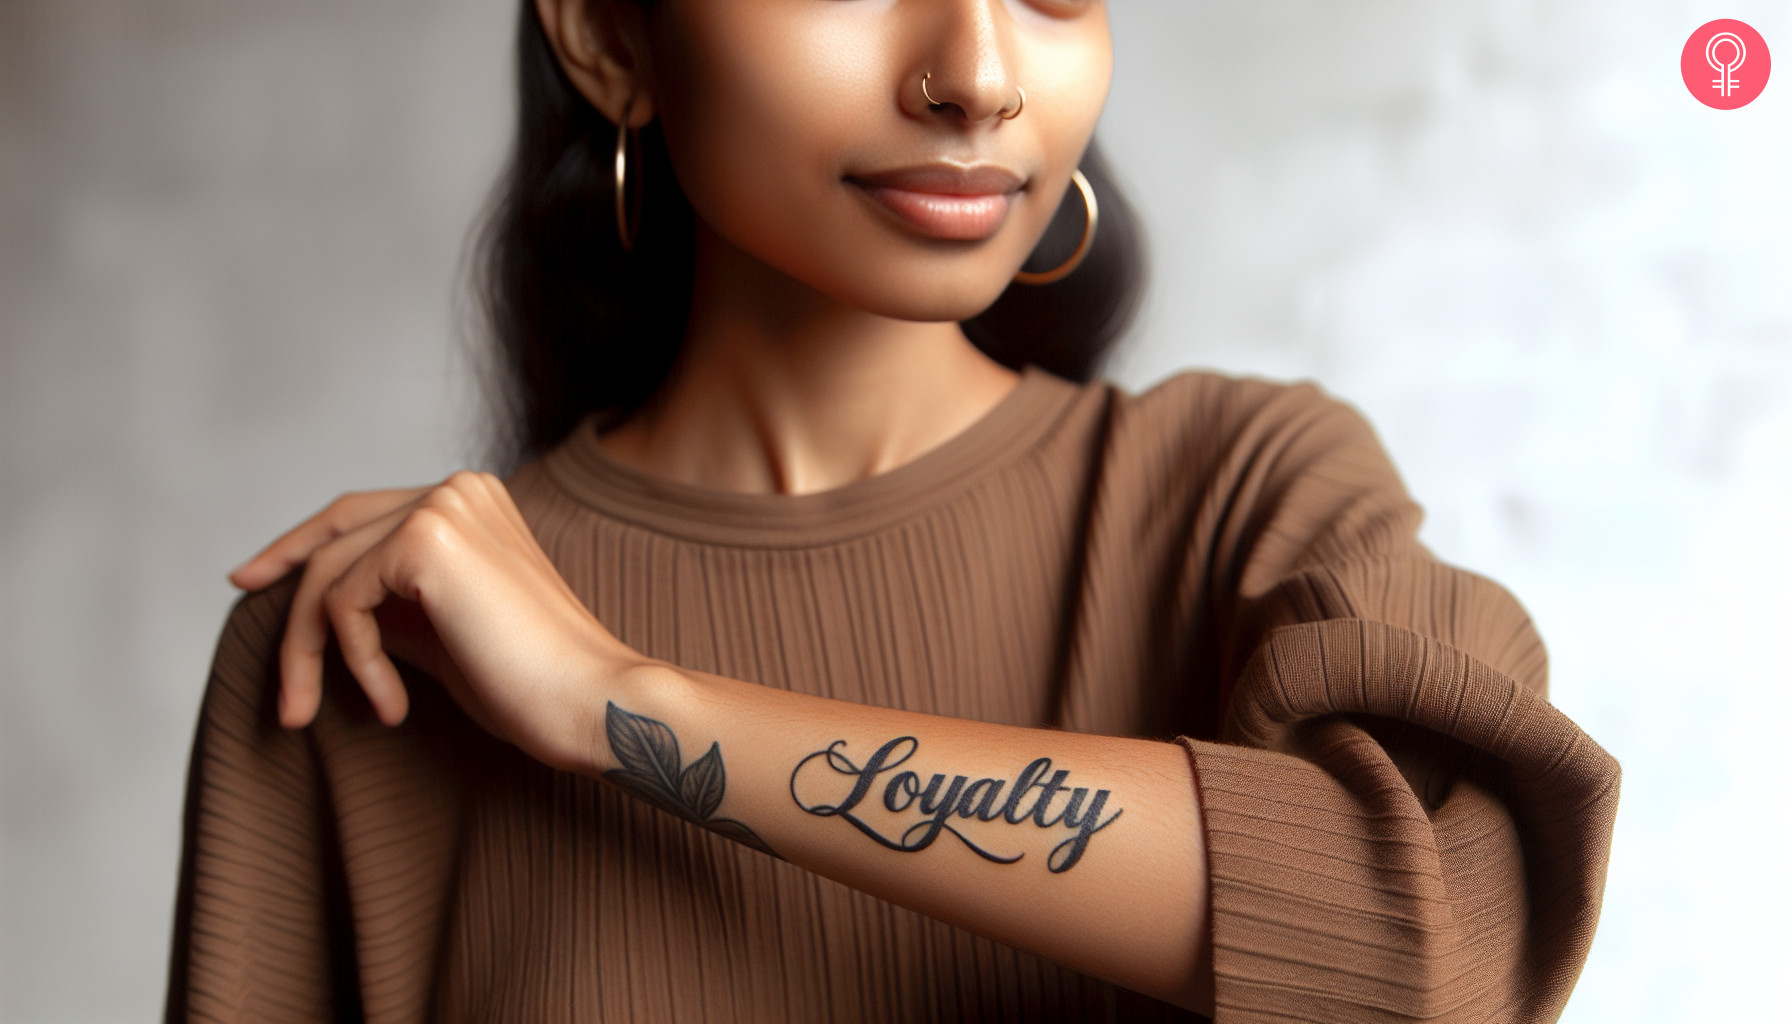 The word loyalty inked in cursive on the wrist.